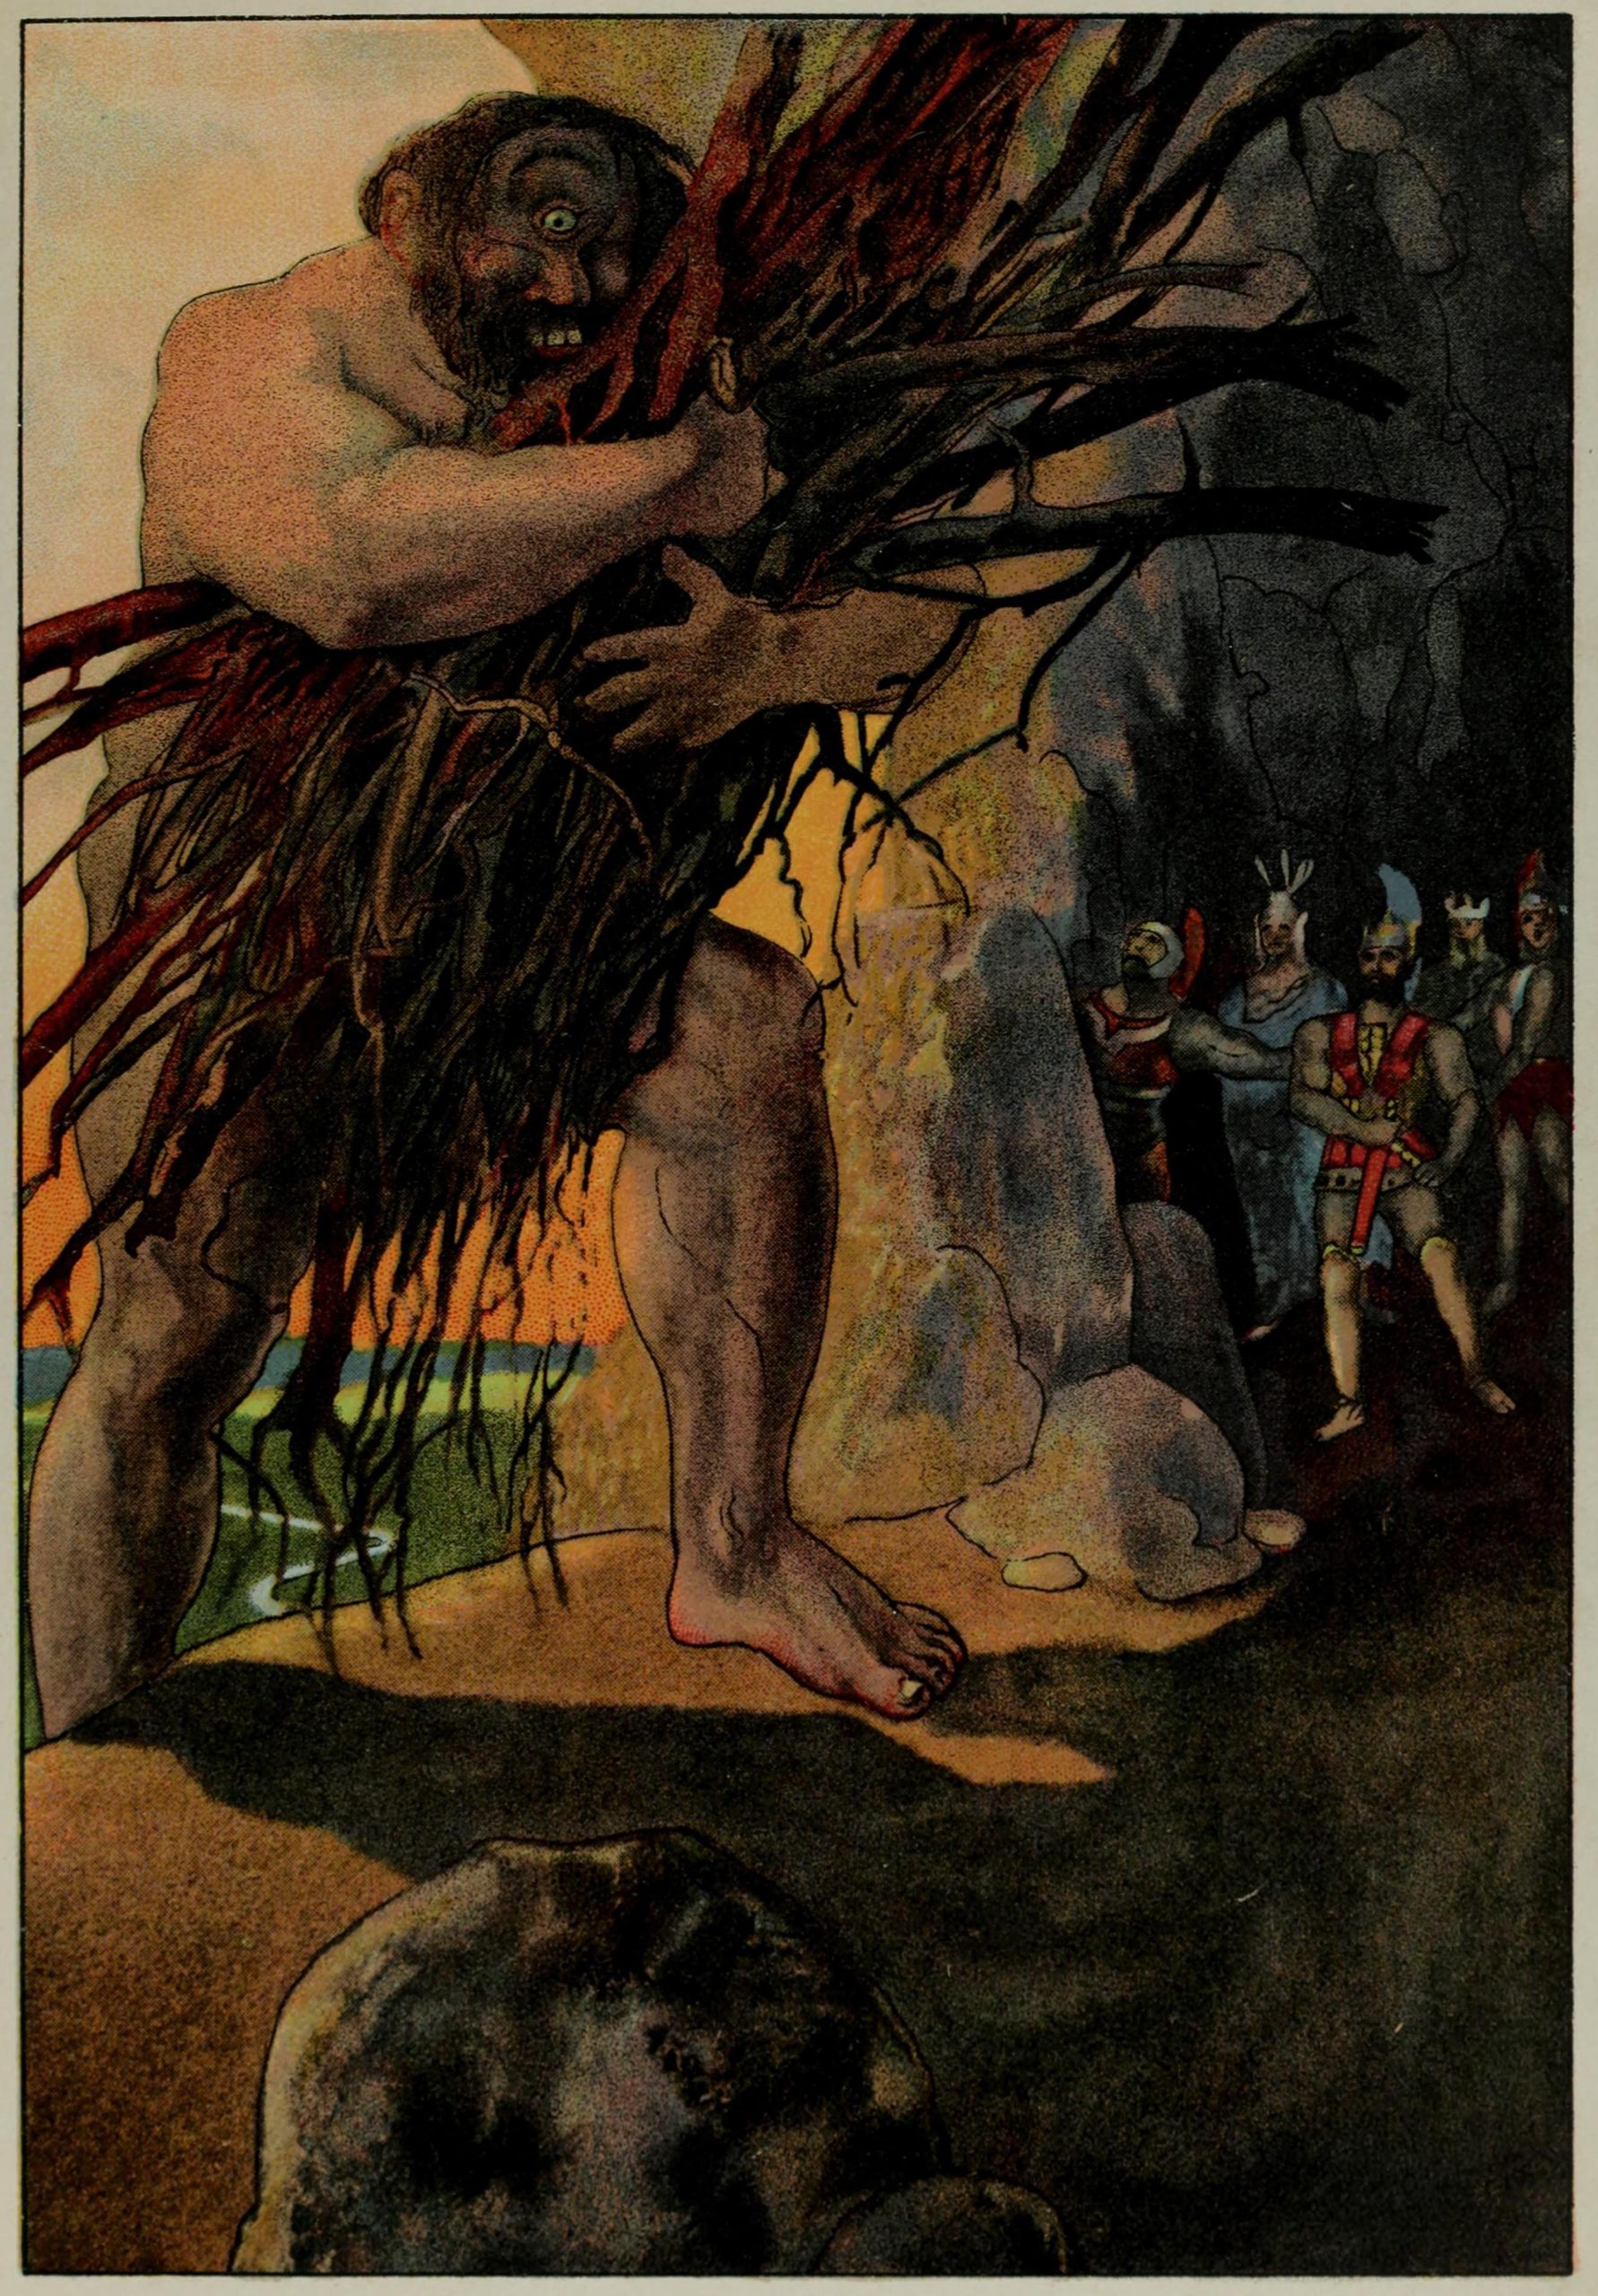 An image of a cyclops standing near a group of soldiers hiding in a cave.